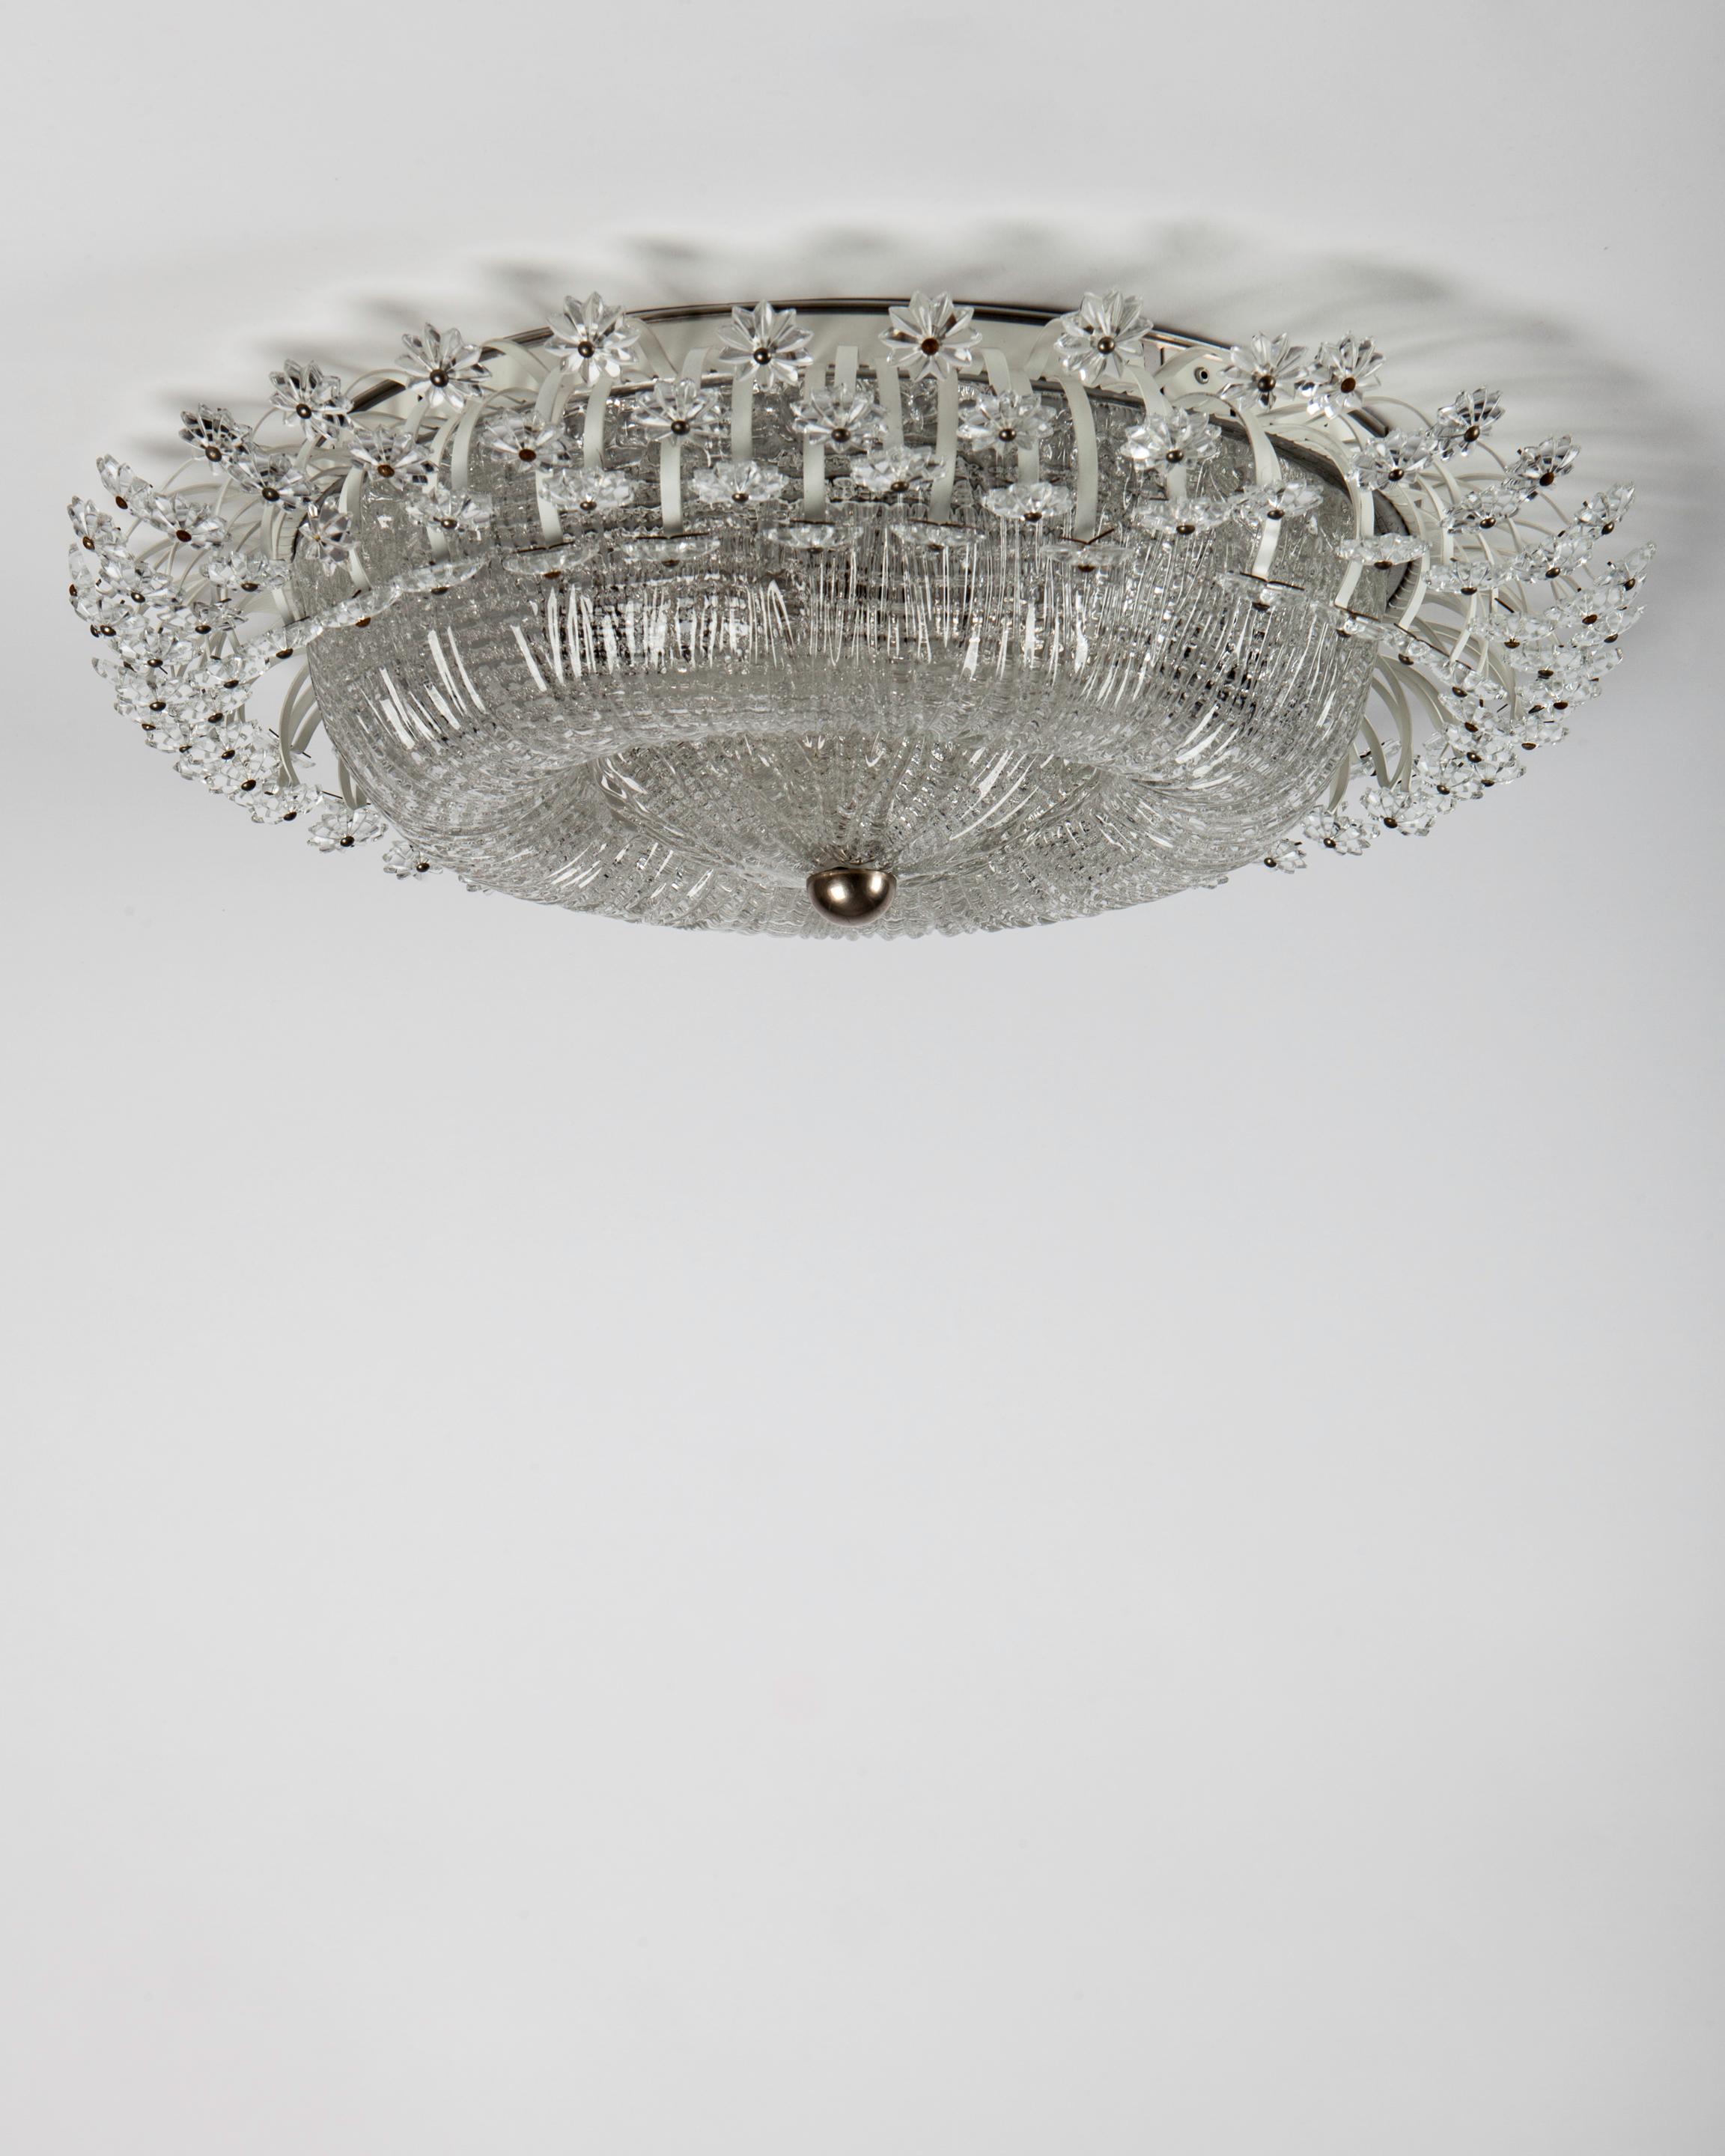 AHL4183
A vintage 1950s flush mount ceiling fixture having a thick textured cast glass dome lens surrounded by a spray of sparkling crystals in the shape of stars or flowers. The frame retains its original white lacquer finish and aged nickel